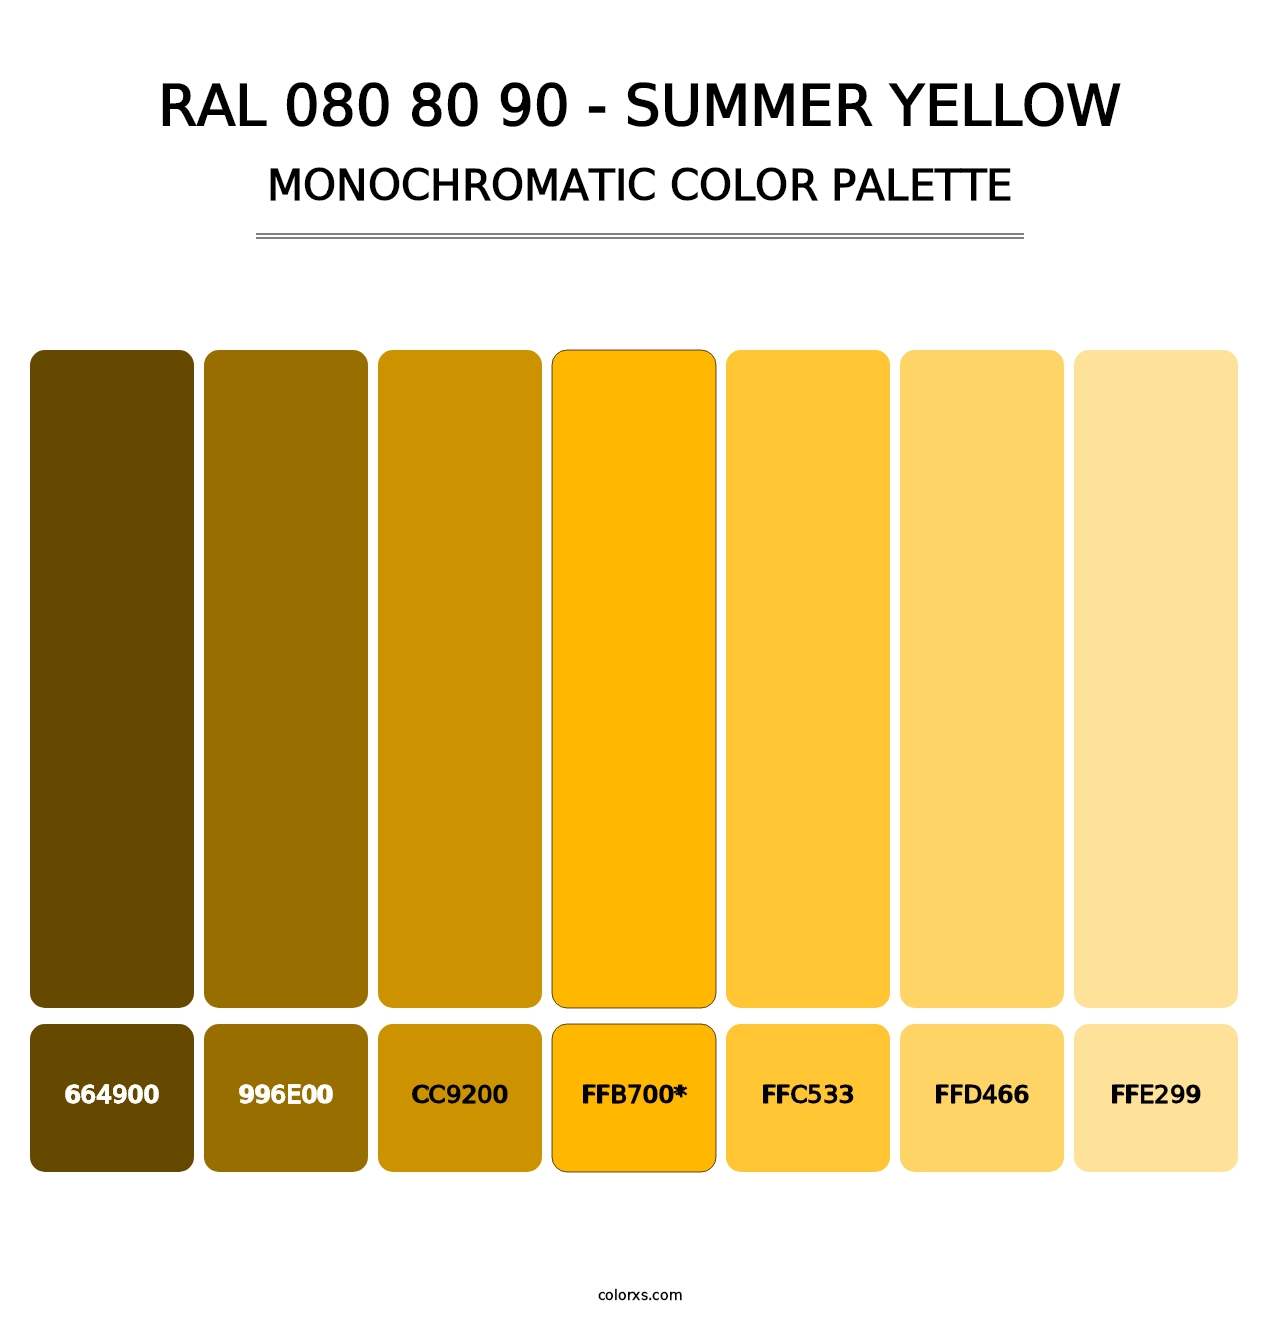 RAL 080 80 90 - Summer Yellow - Monochromatic Color Palette